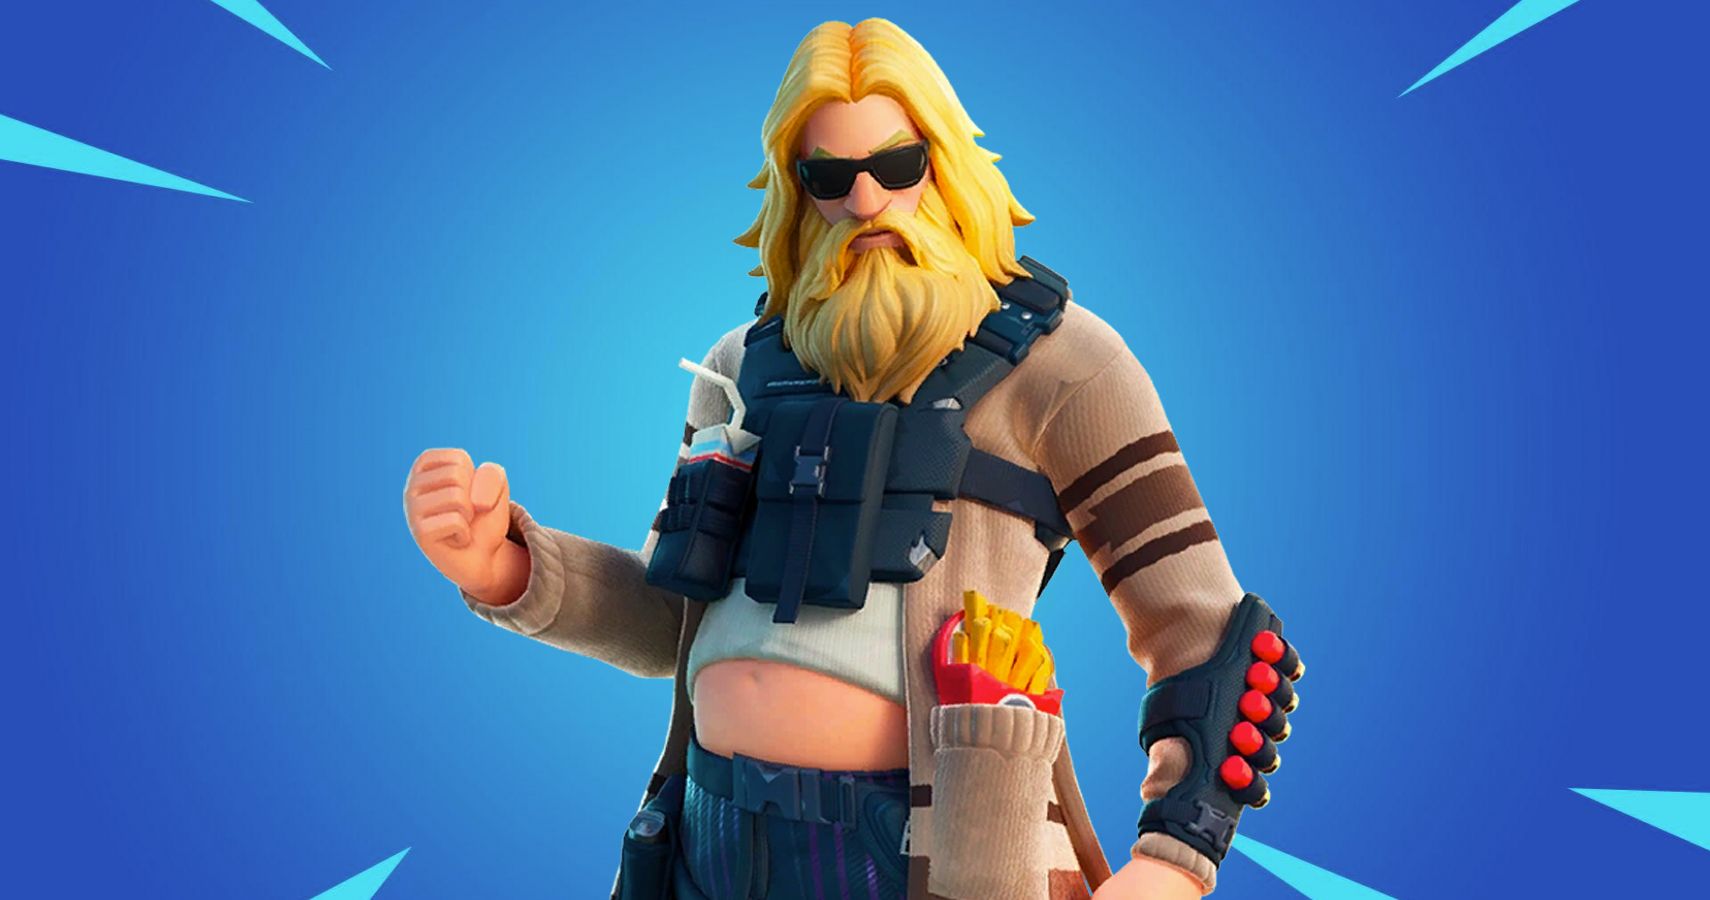 Vie affjedring solopgang Bro Thor From Avengers: Endgame Is Coming To Fortnite